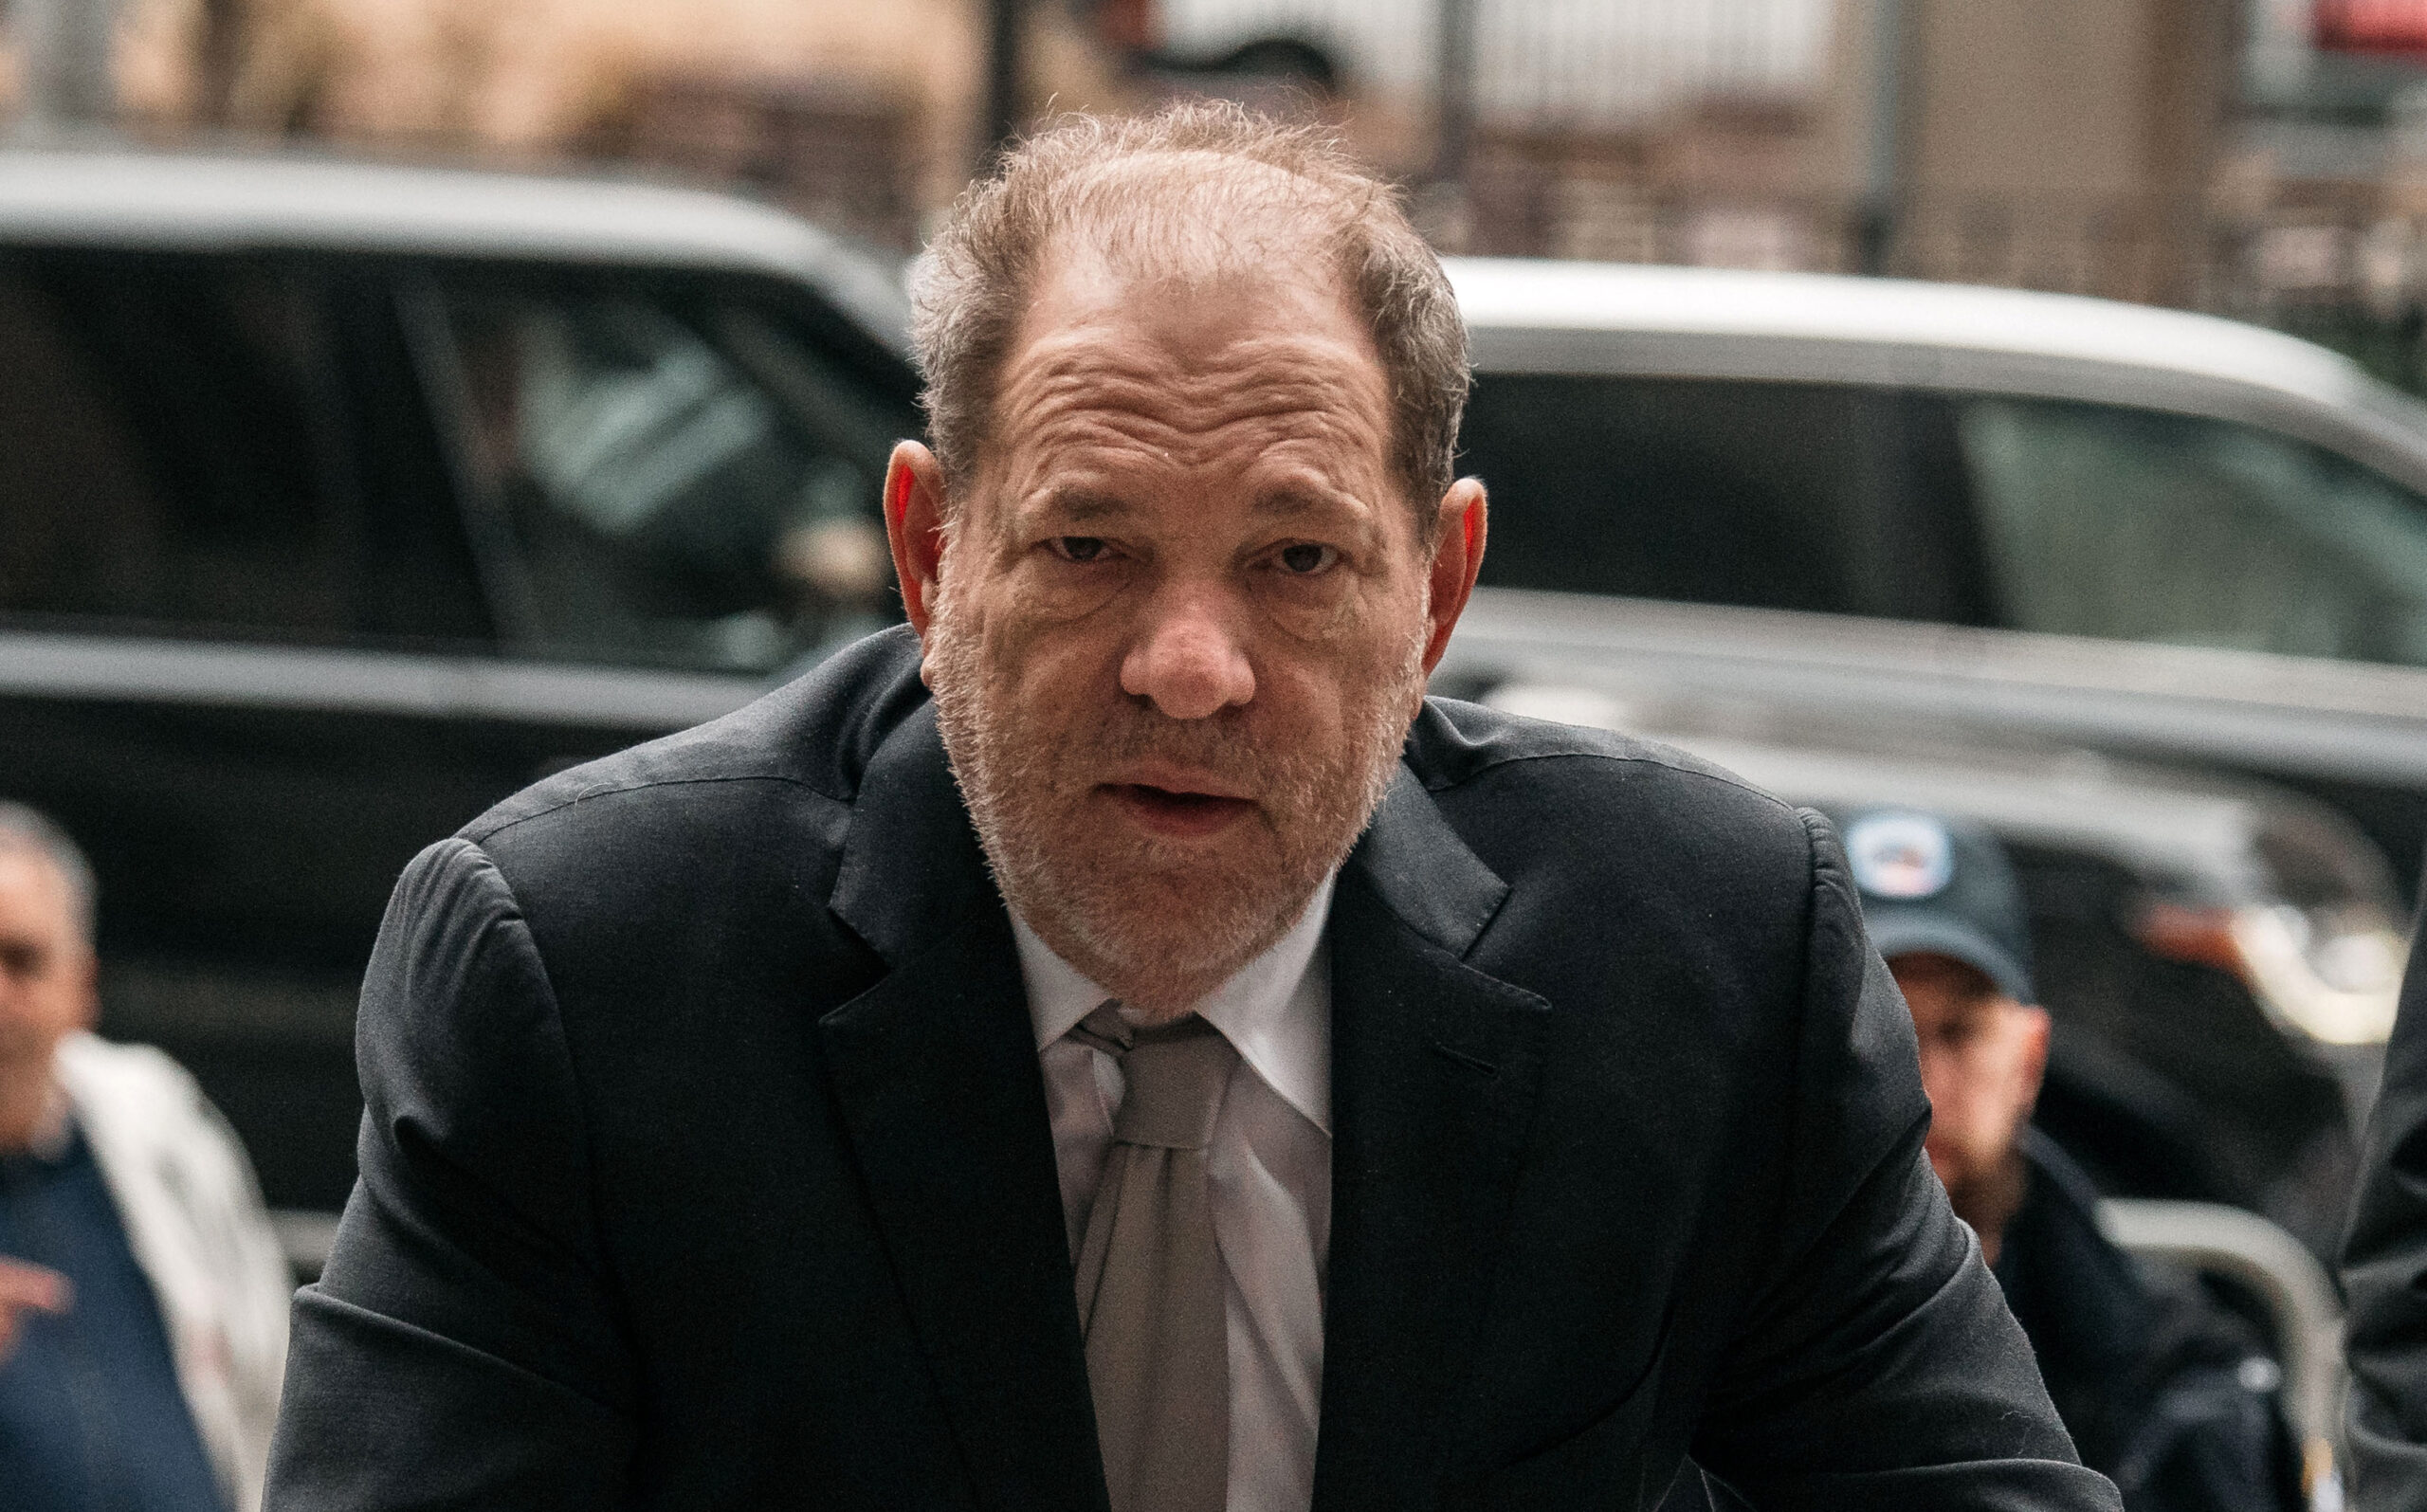 Harvey Weinstein’s Lawyer Describes Holding Cell As ‘Almost Medieval’ And ‘Unsanitary’